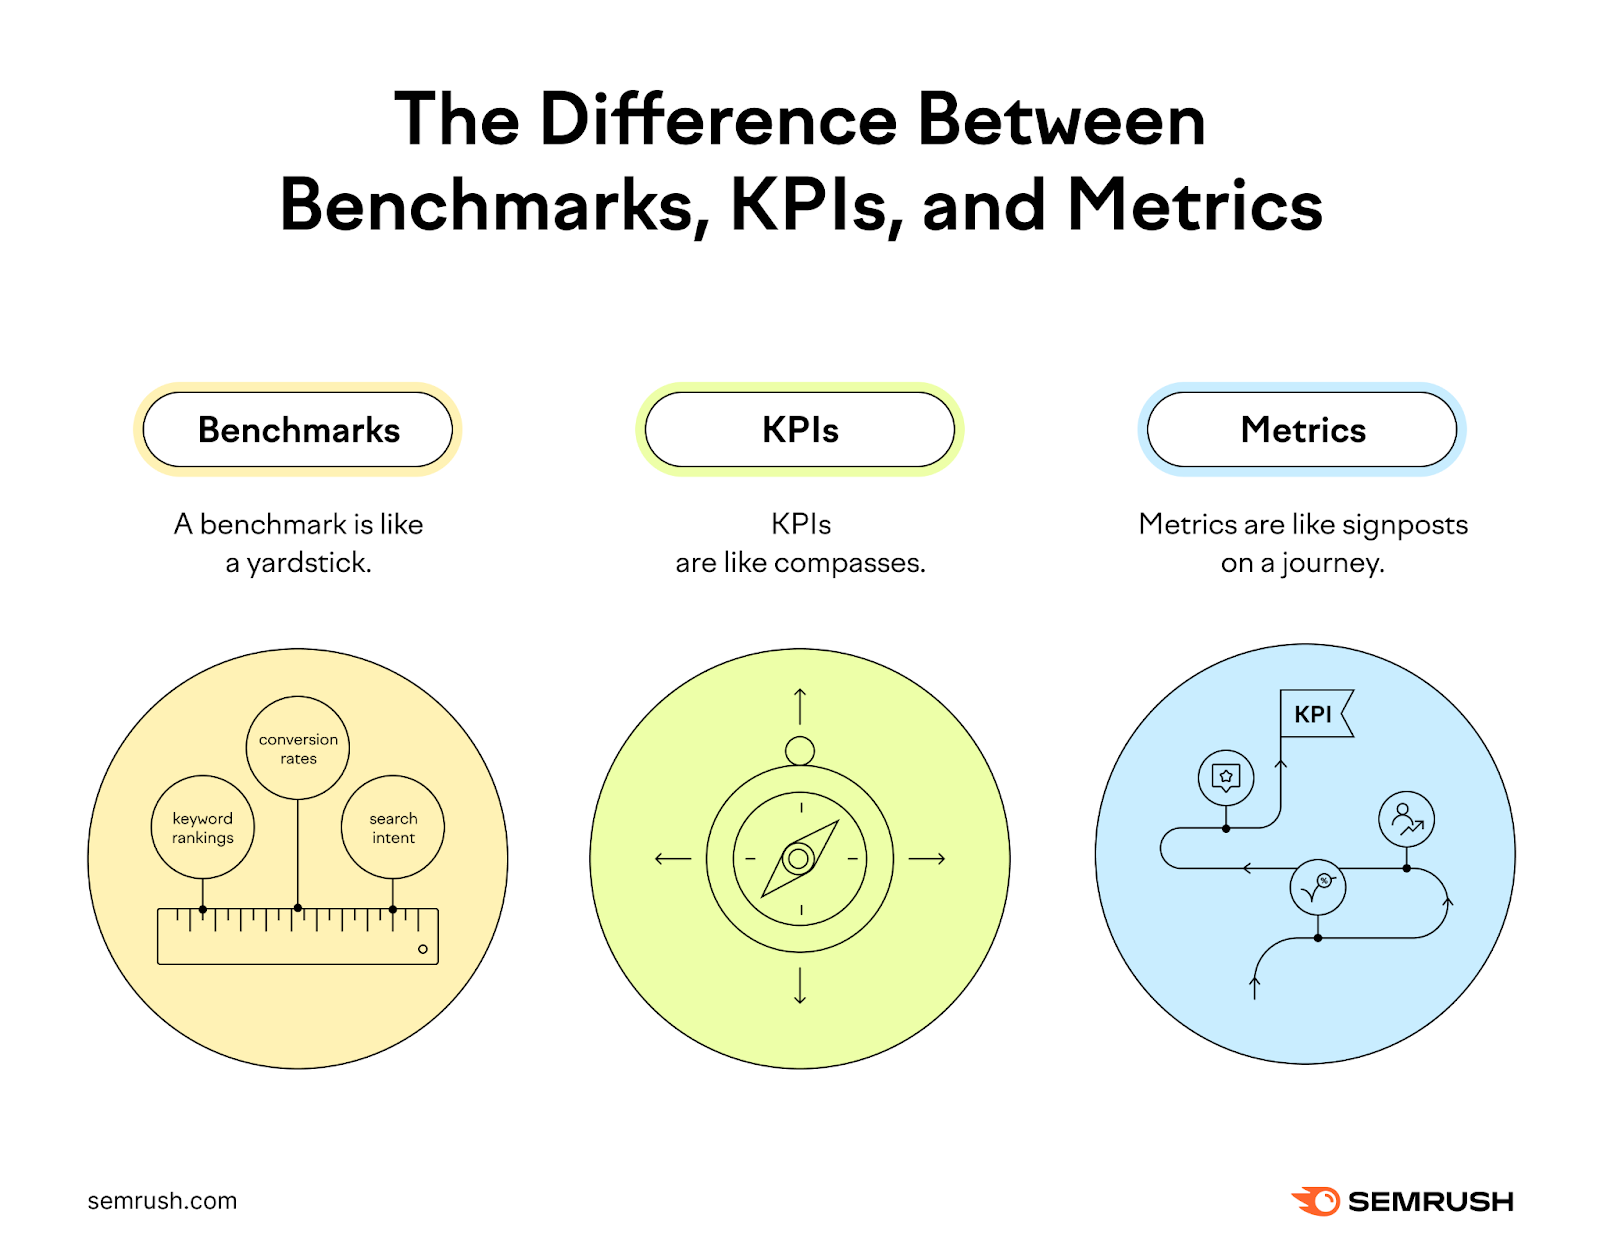 An illustration showing the difference between benchmarks, KPIs and metrics